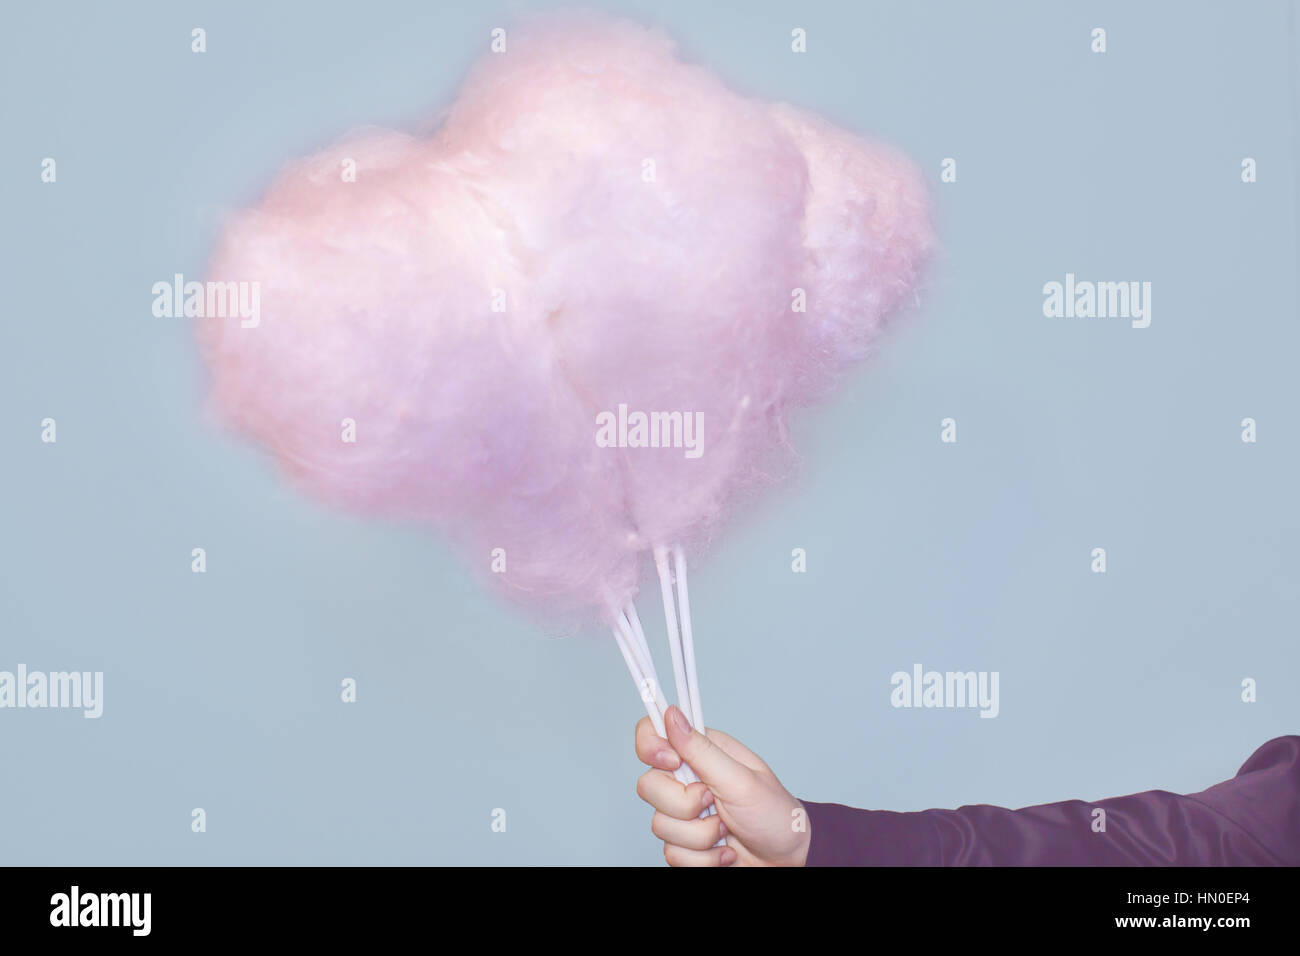 Pink cotton candy Stock Photo